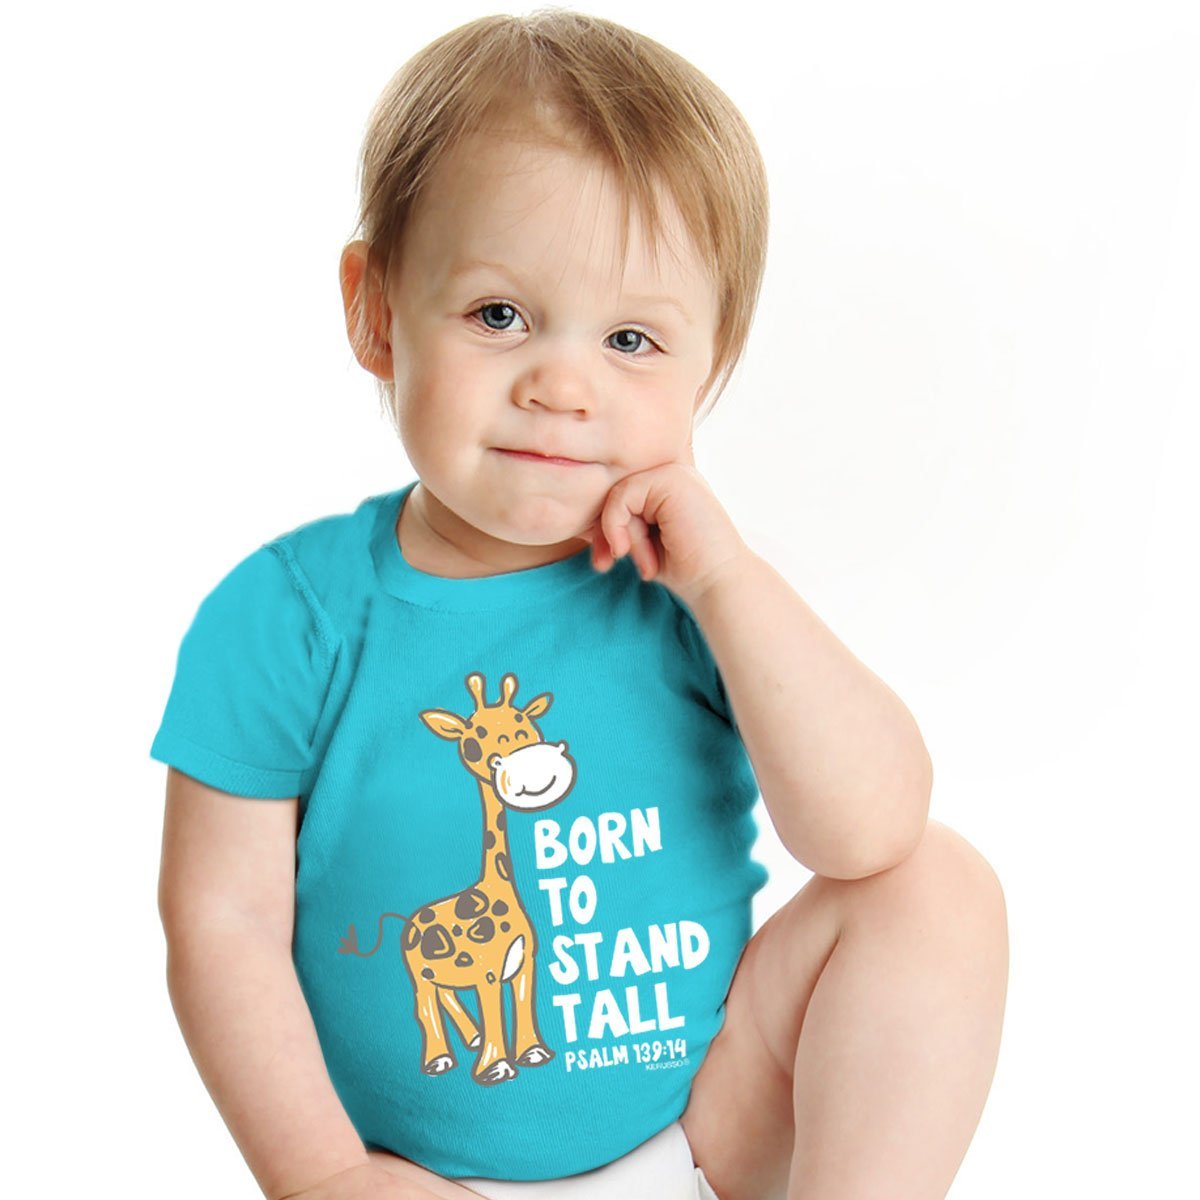 Kerusso Born to Stand Tall Giraffe Christian Baby Toddler Youth Bright T Shirt